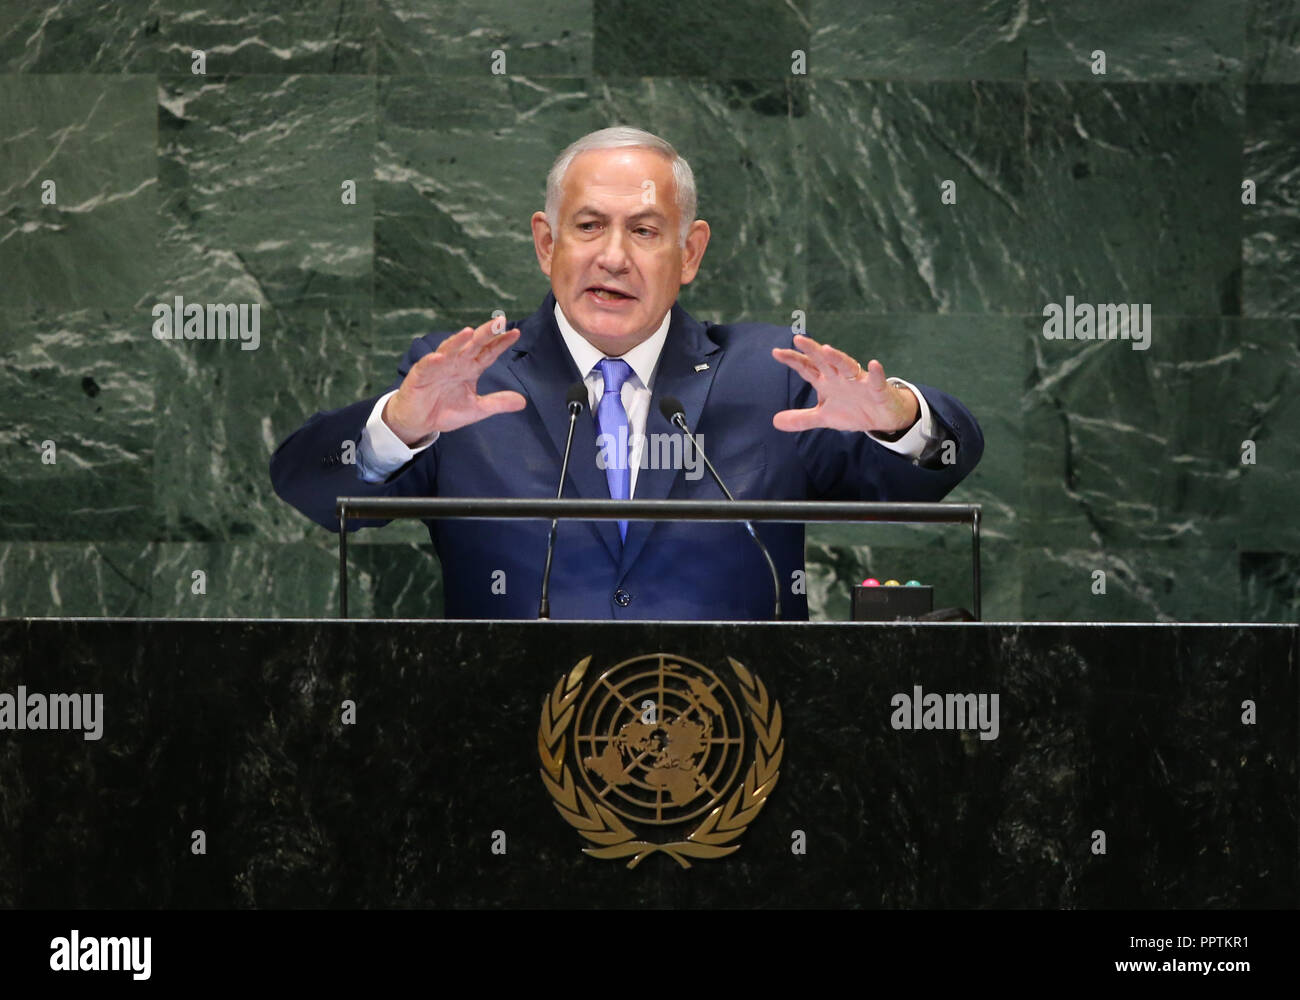 (180927) -- UNITED NATIONS, Sept. 27, 2018 (Xinhua) -- Israeli Prime Minister Benjamin Netanyahu addresses the General Debate of the 73rd session of the United Nations General Assembly at the UN headquarters in New York, on Sept. 27, 2018. (Xinhua/Qin Lang) Stock Photo